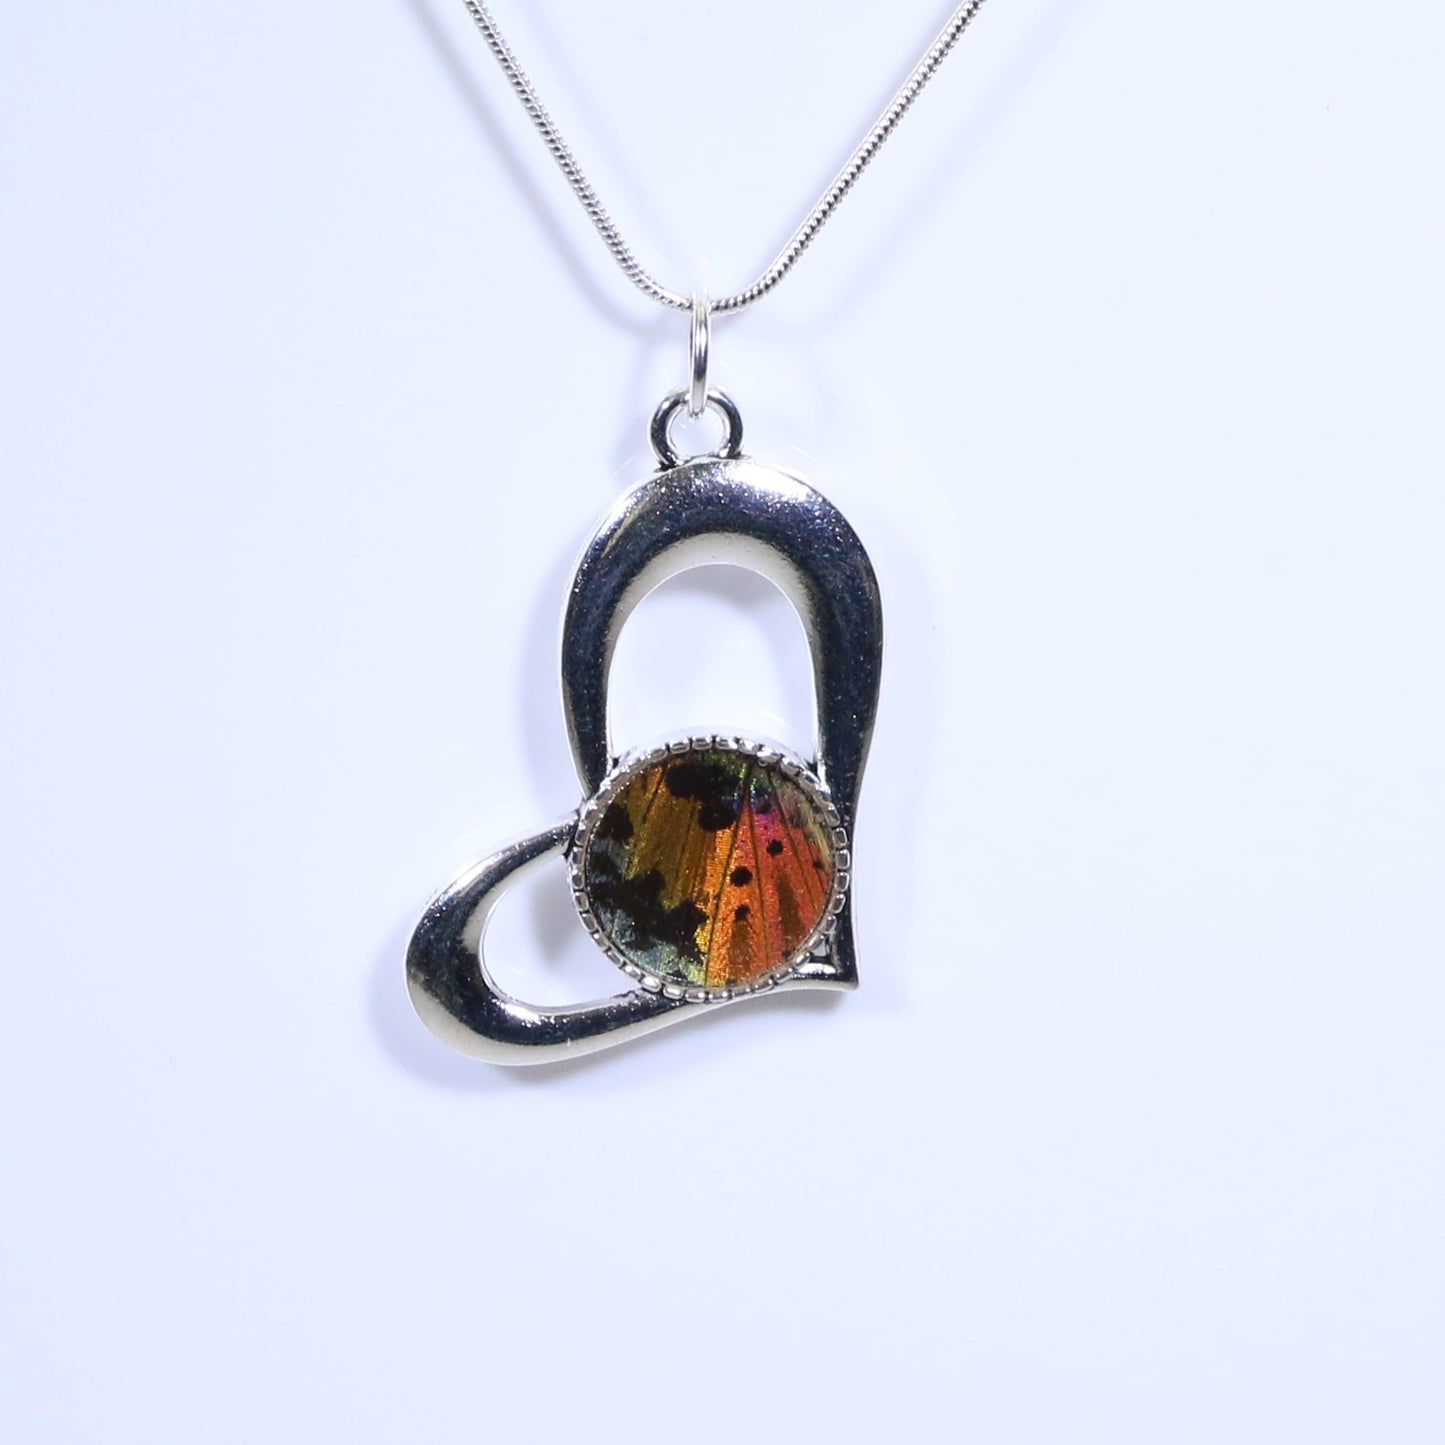 52402 - Real Butterfly Wing Jewelry - Pendant - Heart-Shaped - Sunset Moth - Orange